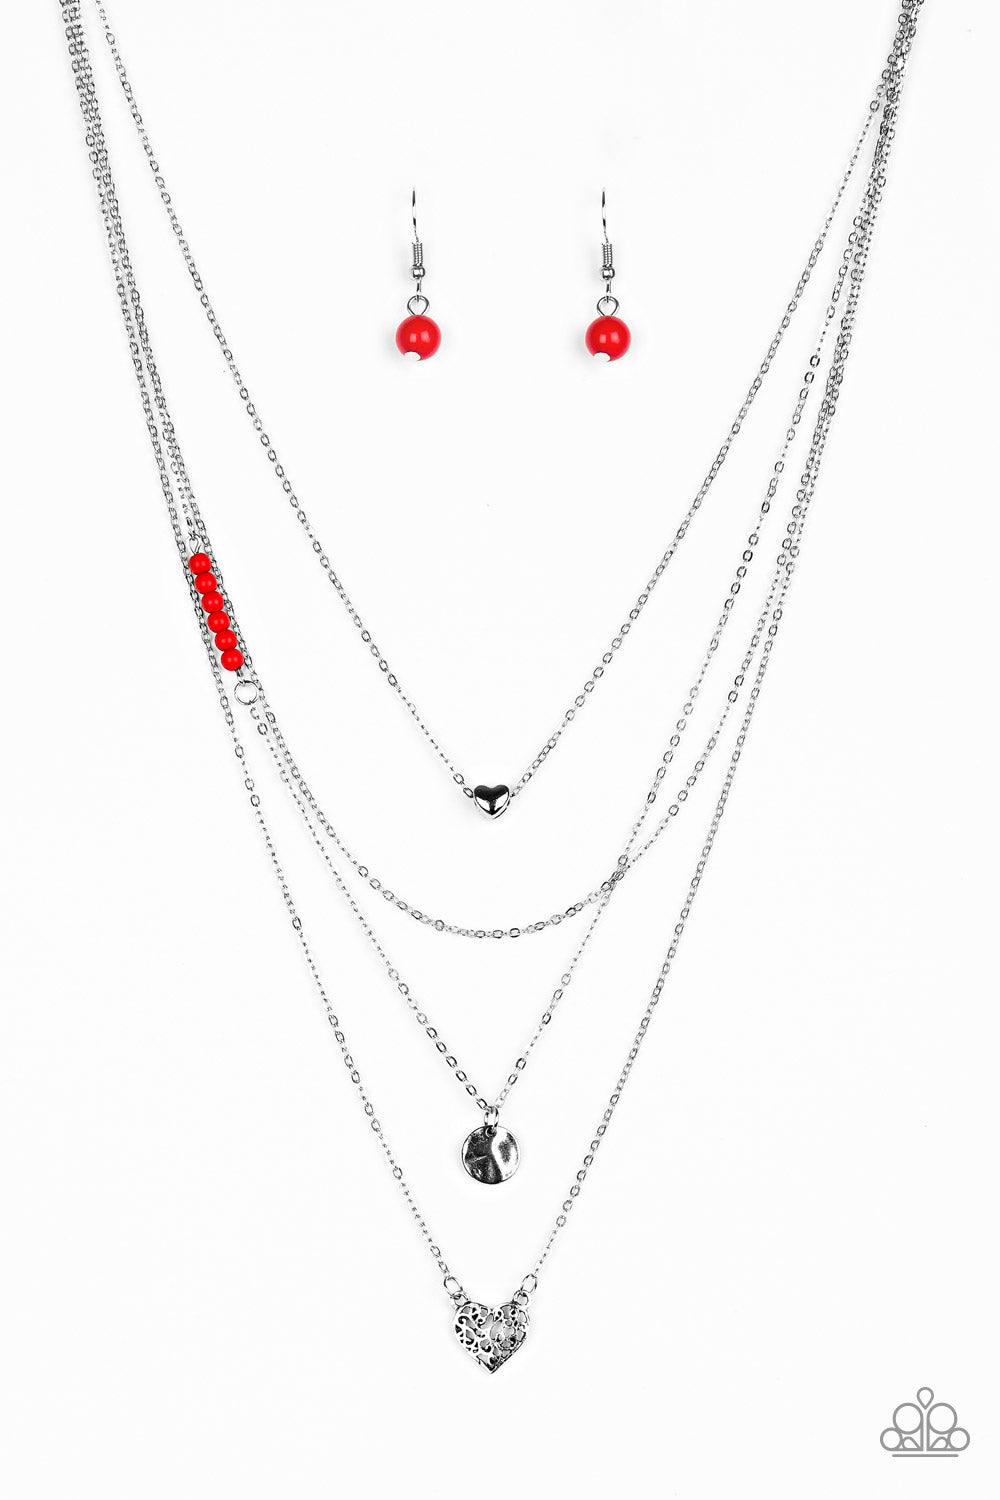 Gypsy Heart Necklace - Red